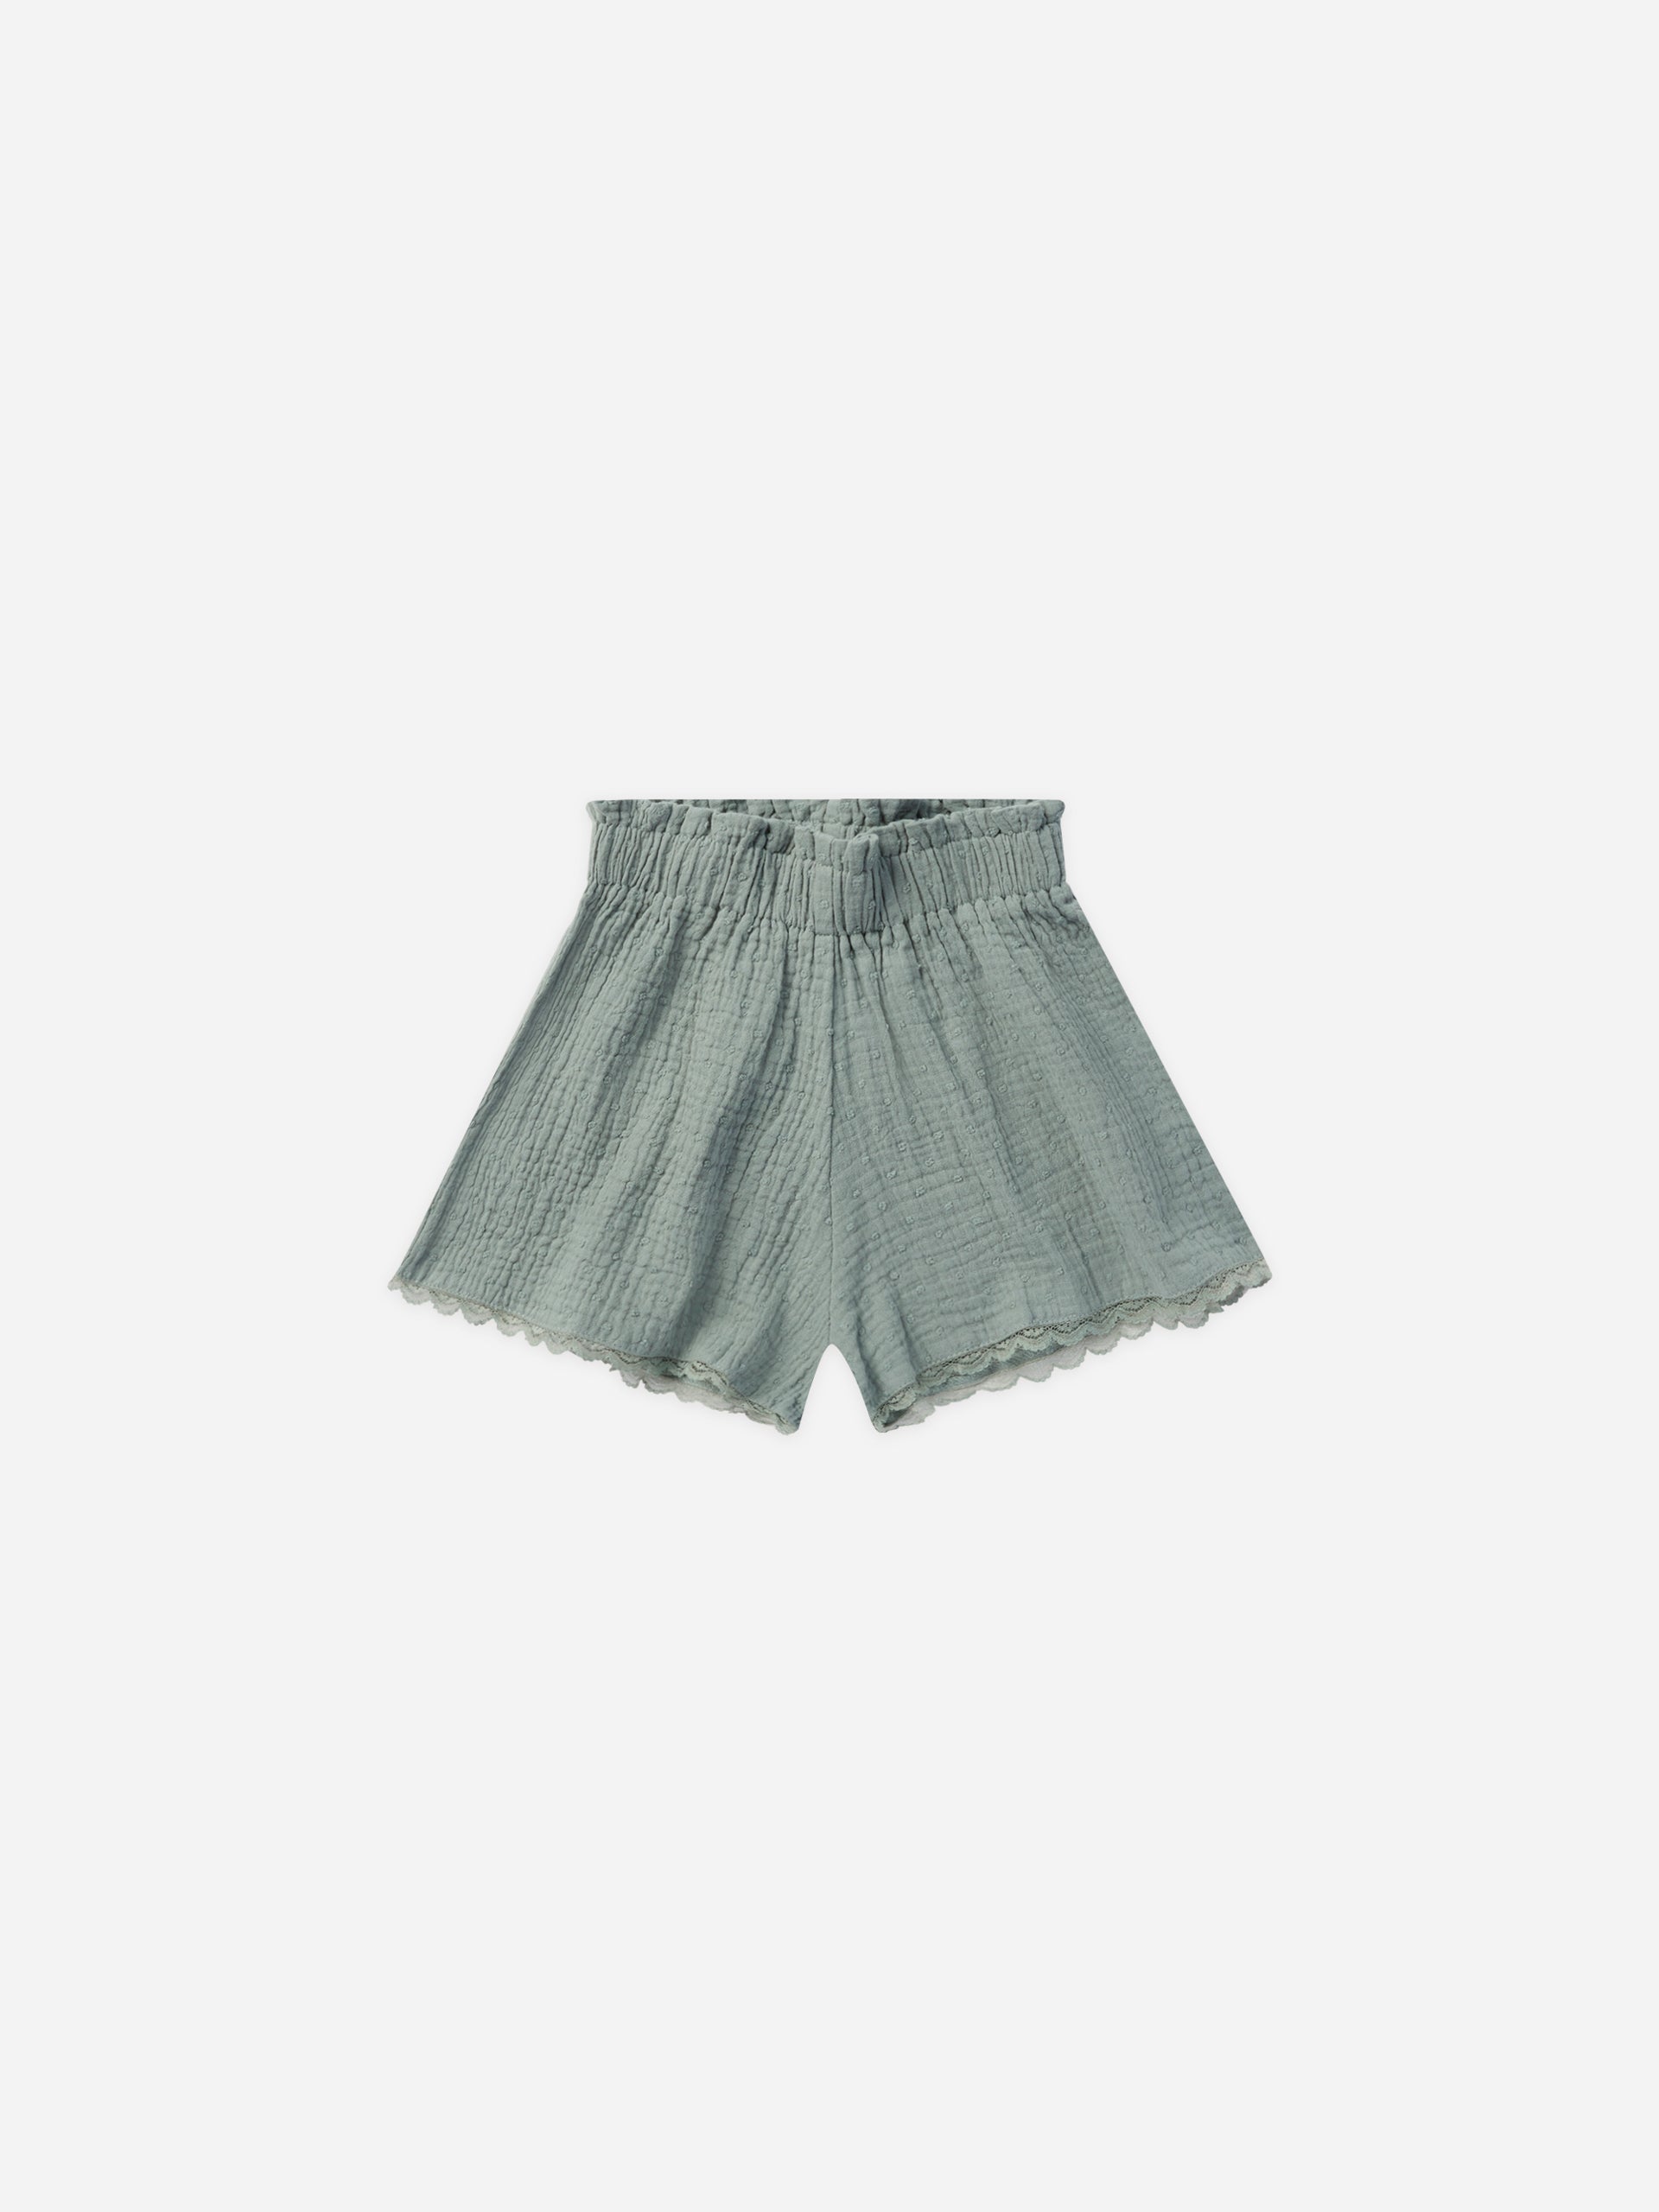 Remi Shorts || Aqua - Rylee + Cru | Kids Clothes | Trendy Baby Clothes | Modern Infant Outfits |